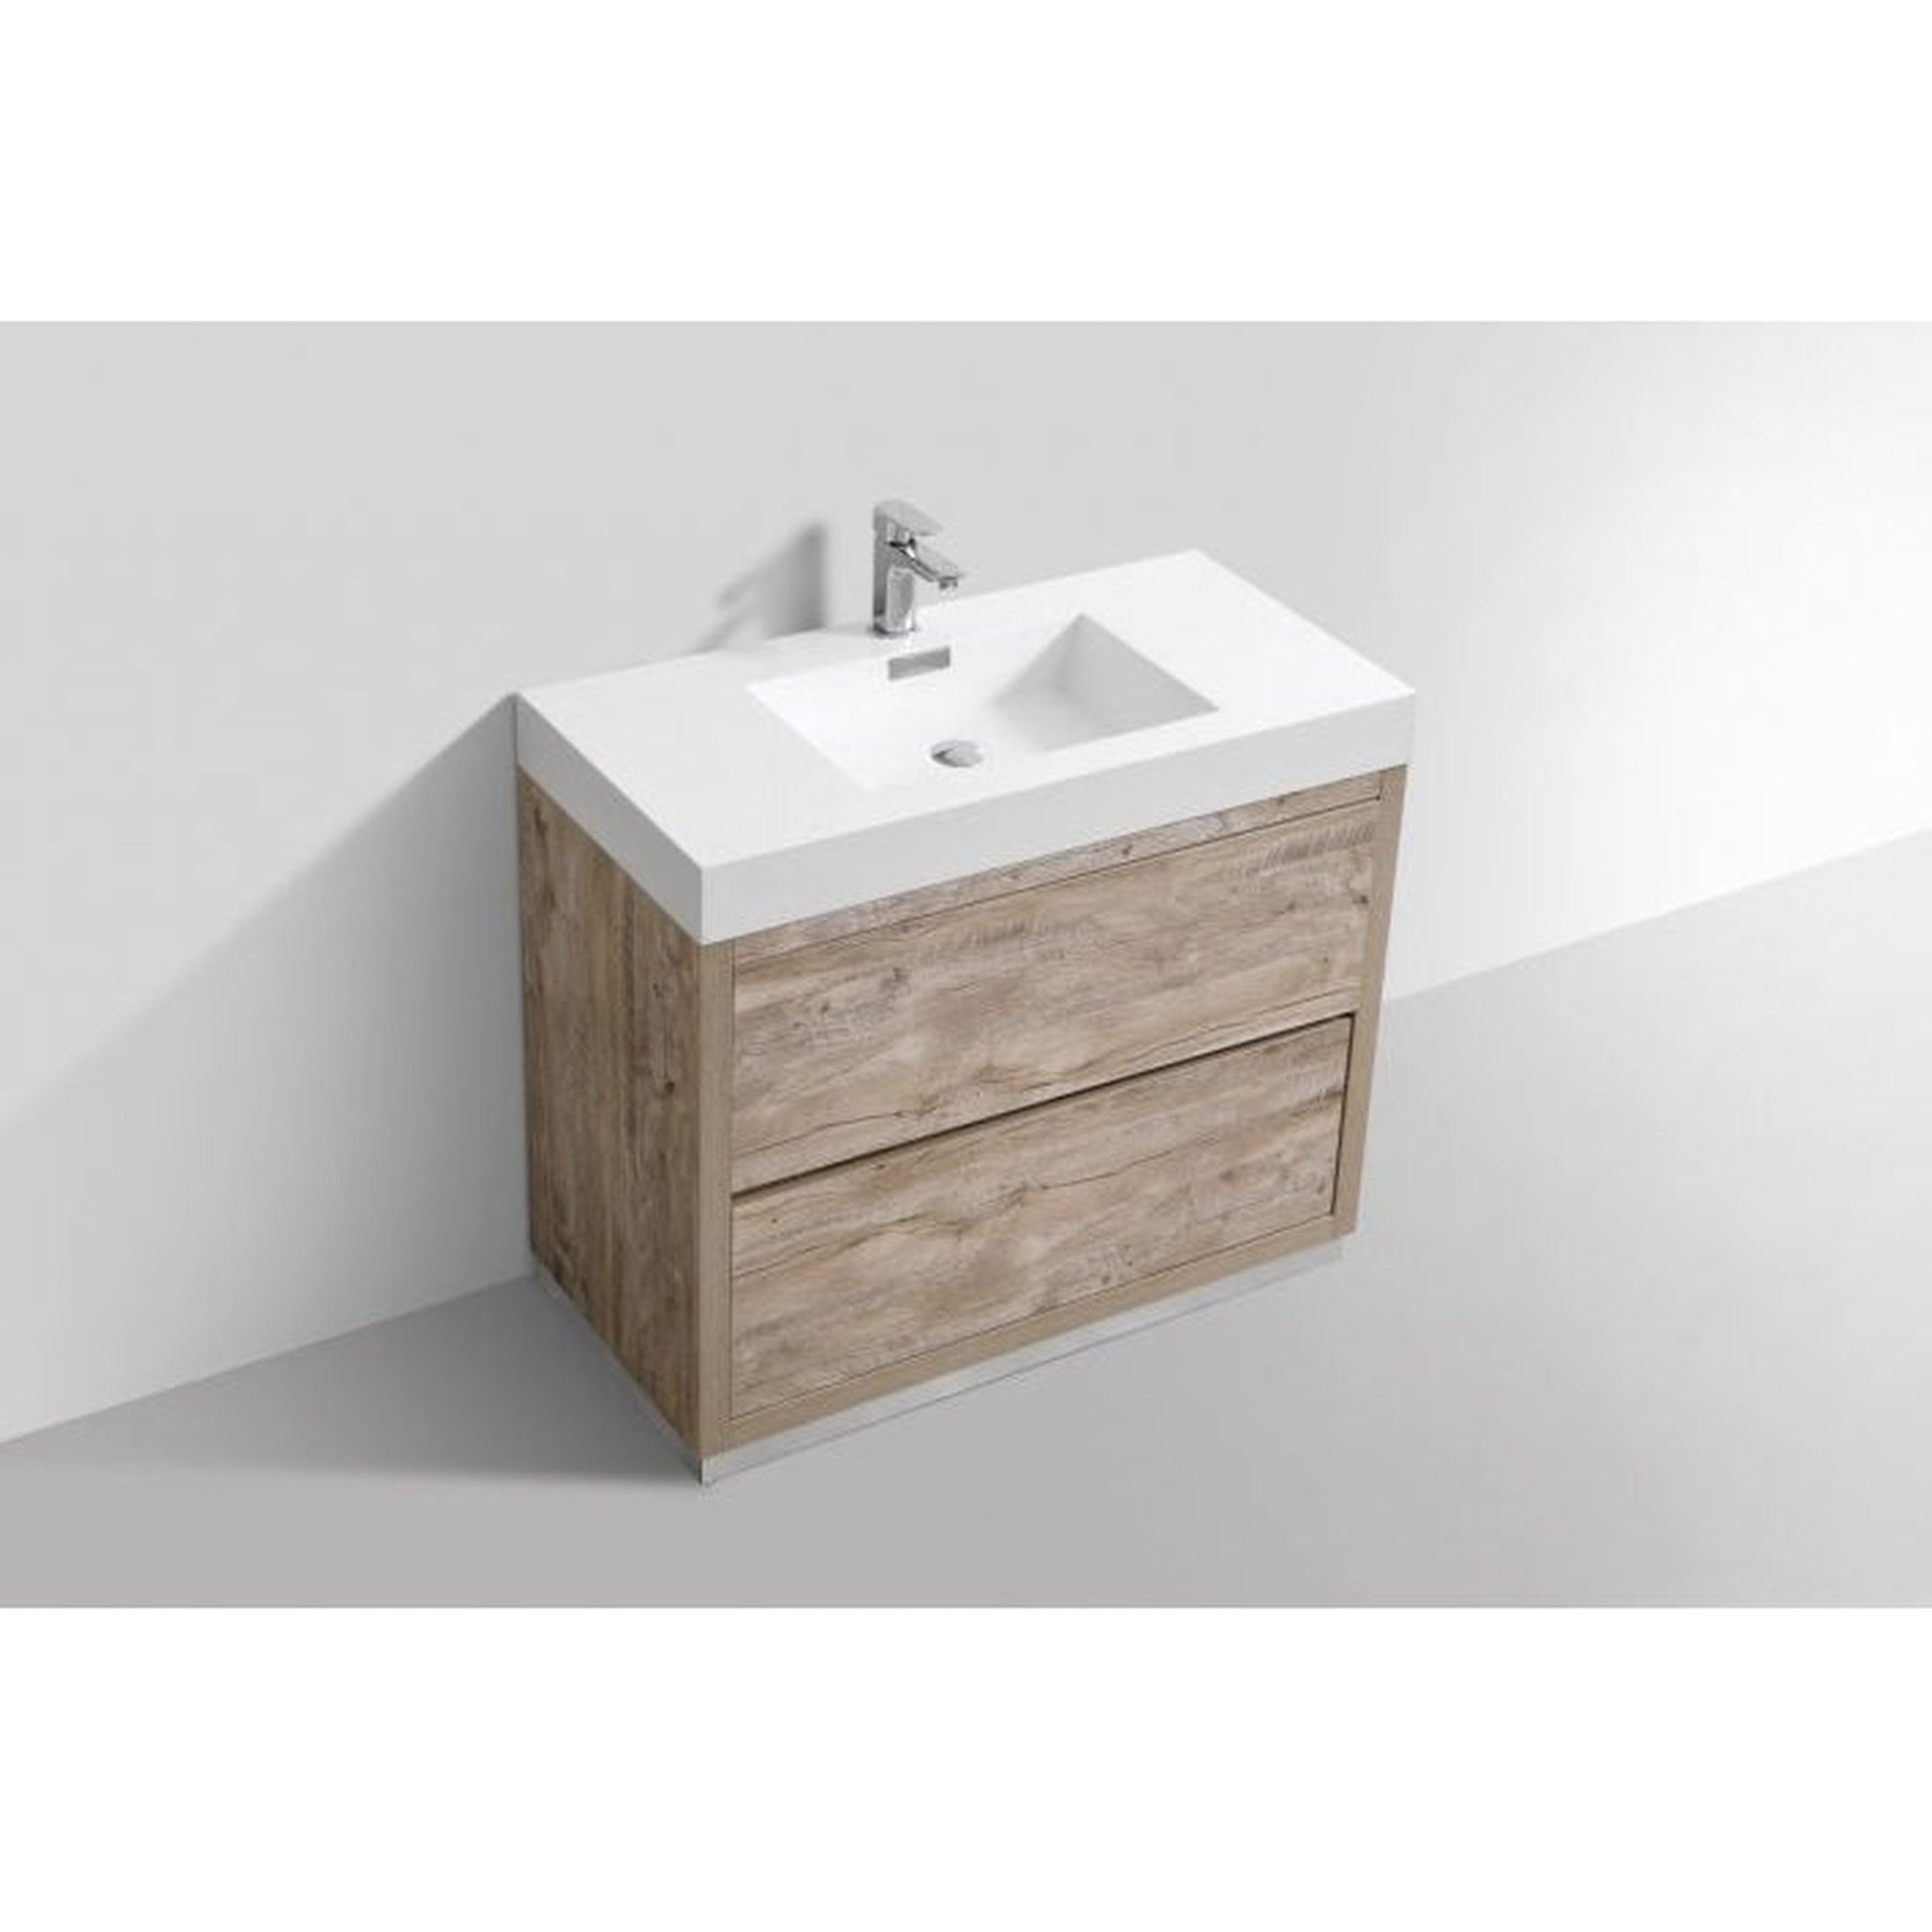 KubeBath Bliss 40" Nature Wood Freestanding Modern Bathroom Vanity With Single Integrated Acrylic Sink With Overflow and 36" Wood Framed Mirror With Shelf